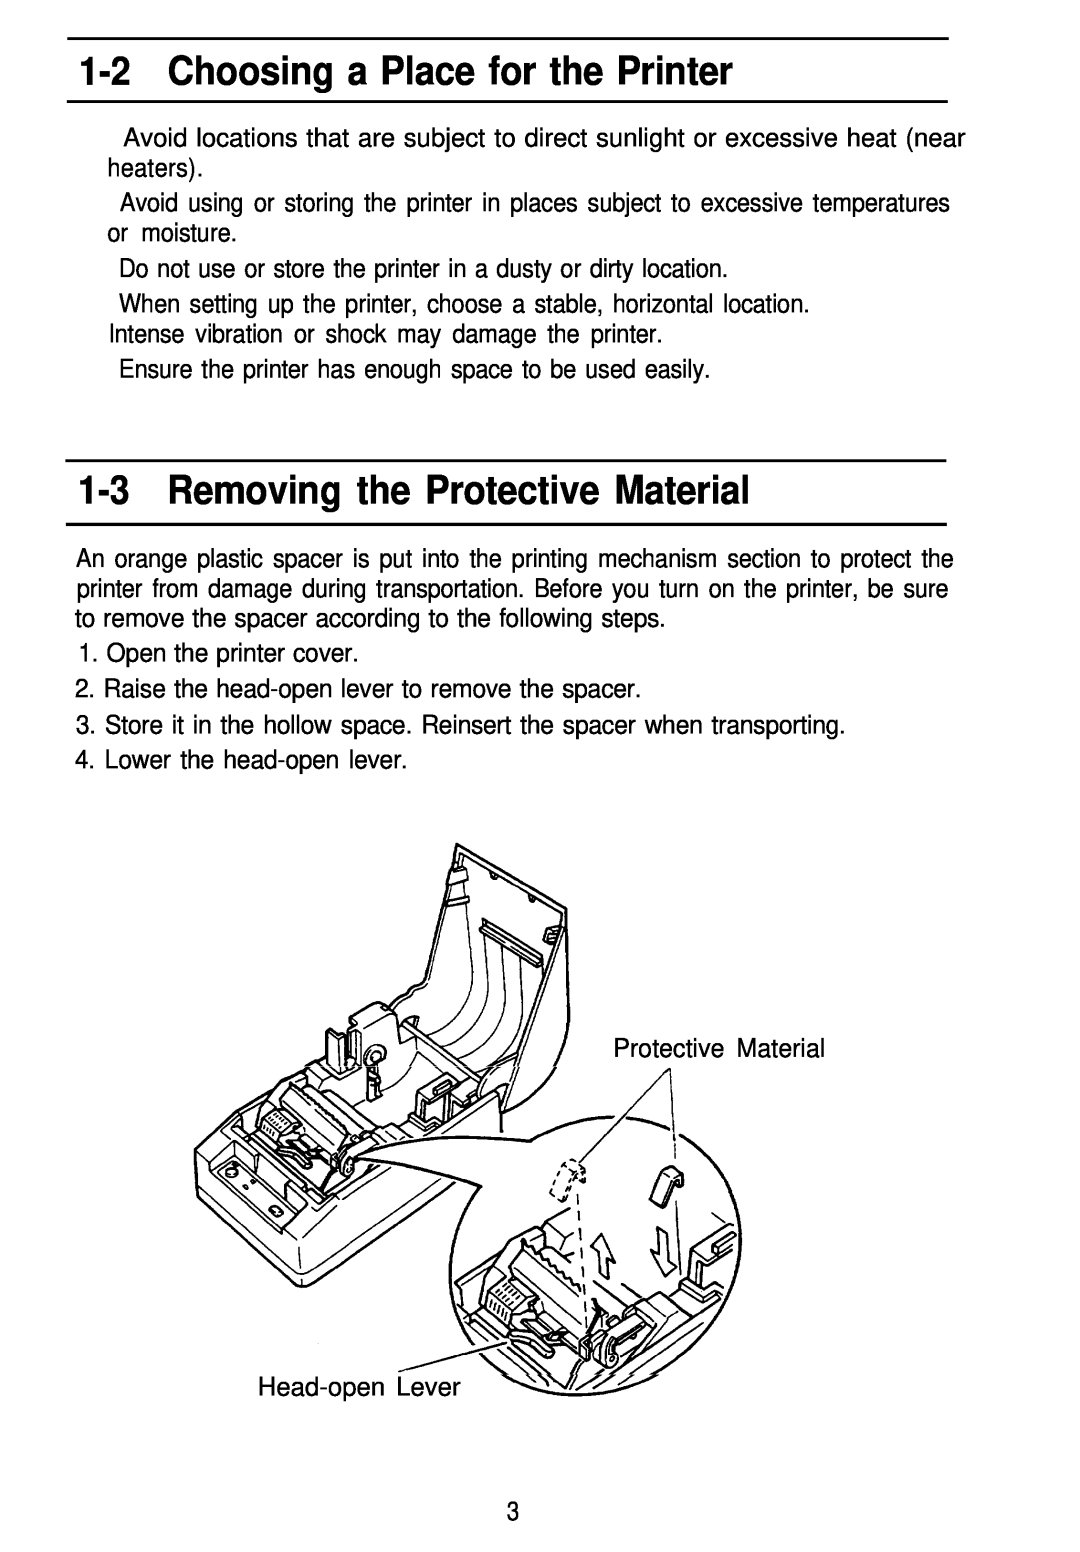 Seiko Group TM-L60 manual Choosing a Place for the Printer, Removing the Protective Material 